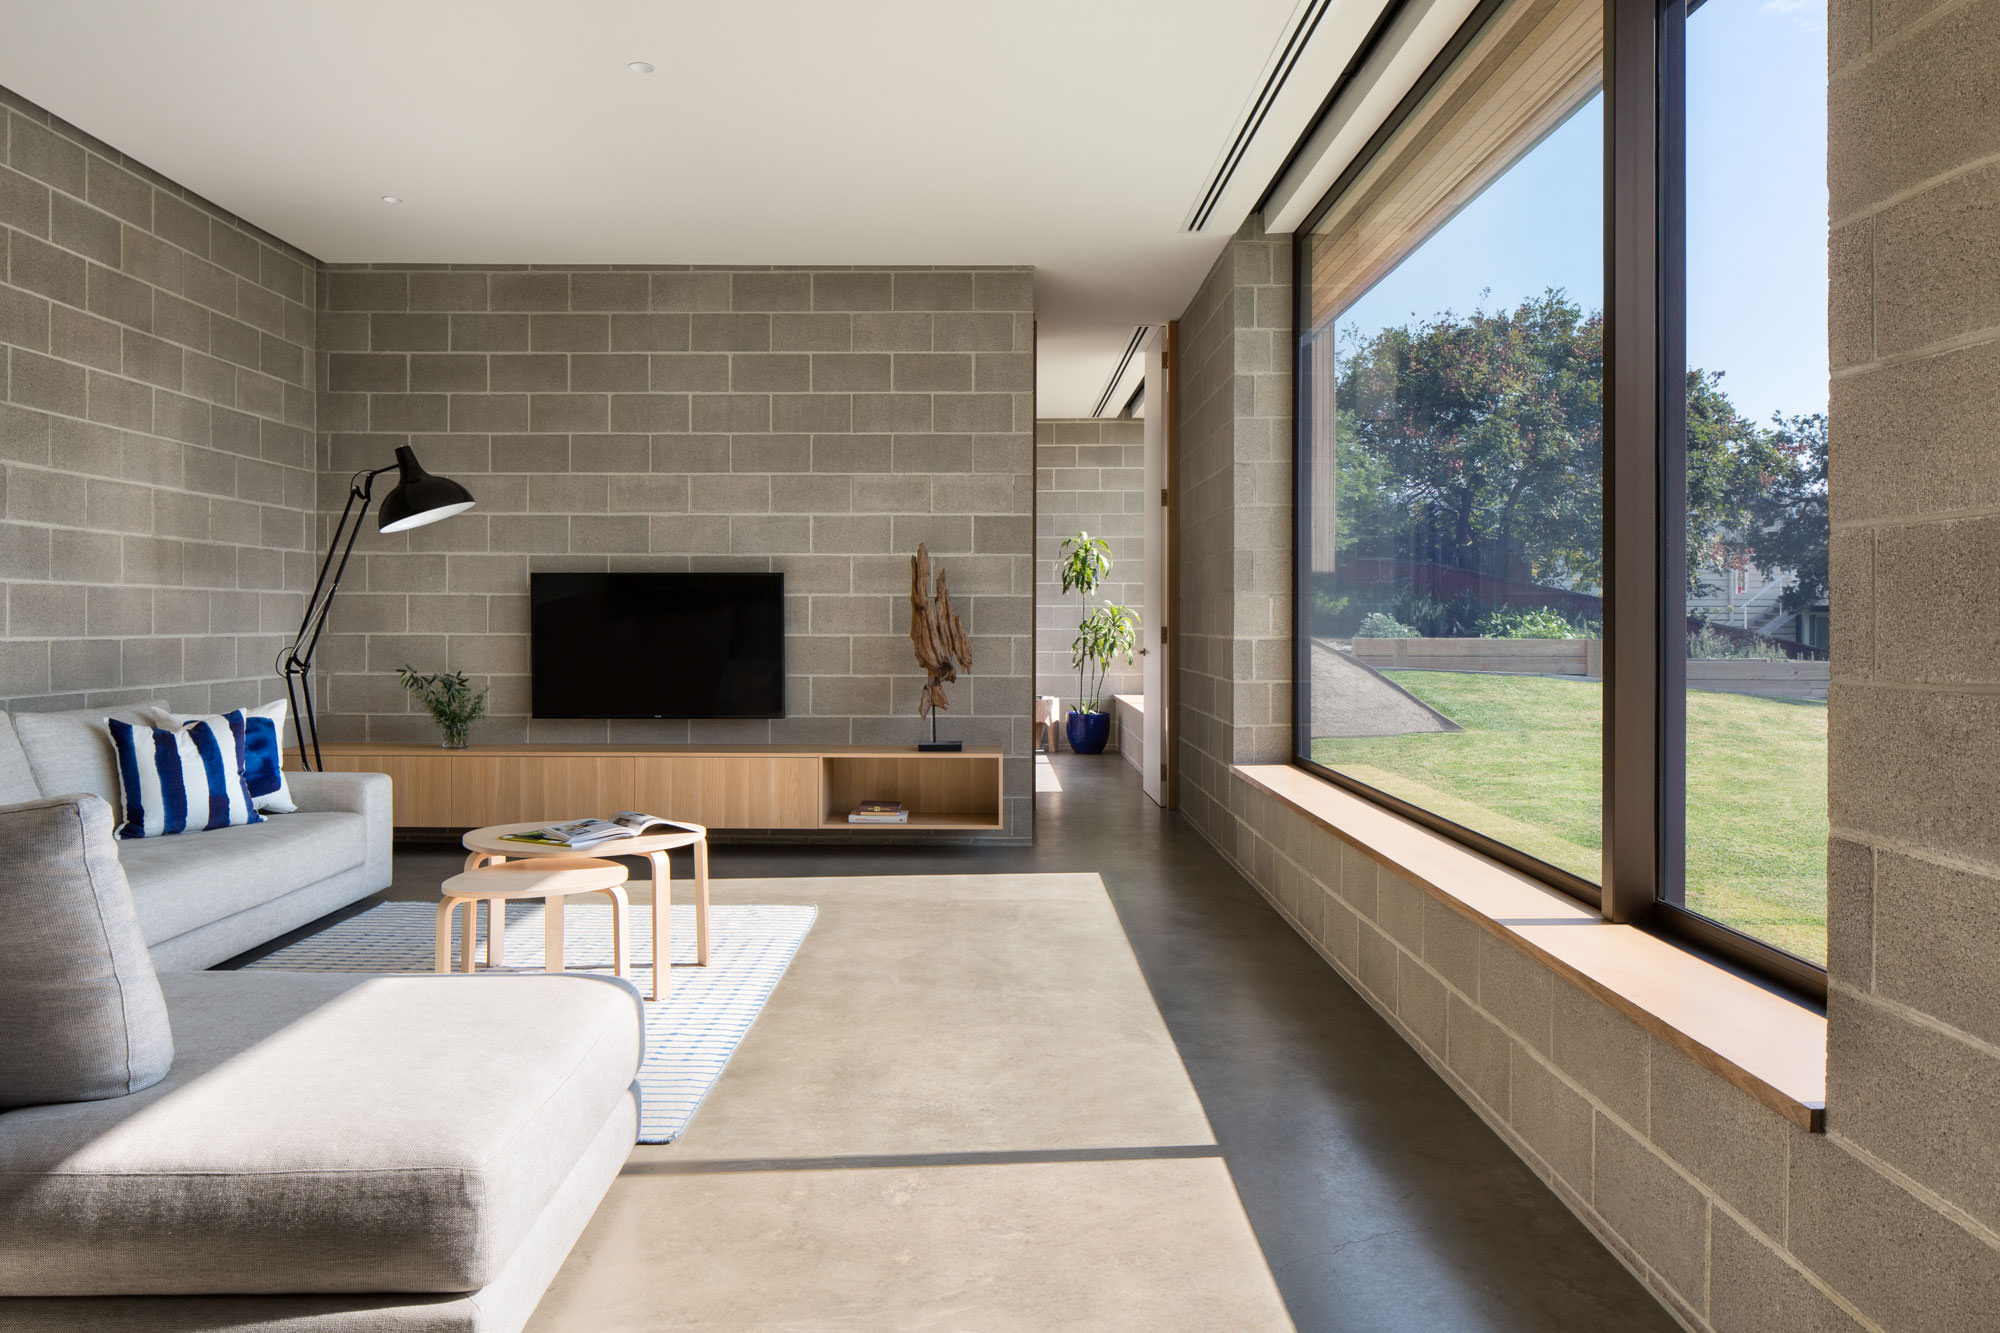 Parkside Beach House in Sorrento, Victoria, by Cera Stribley